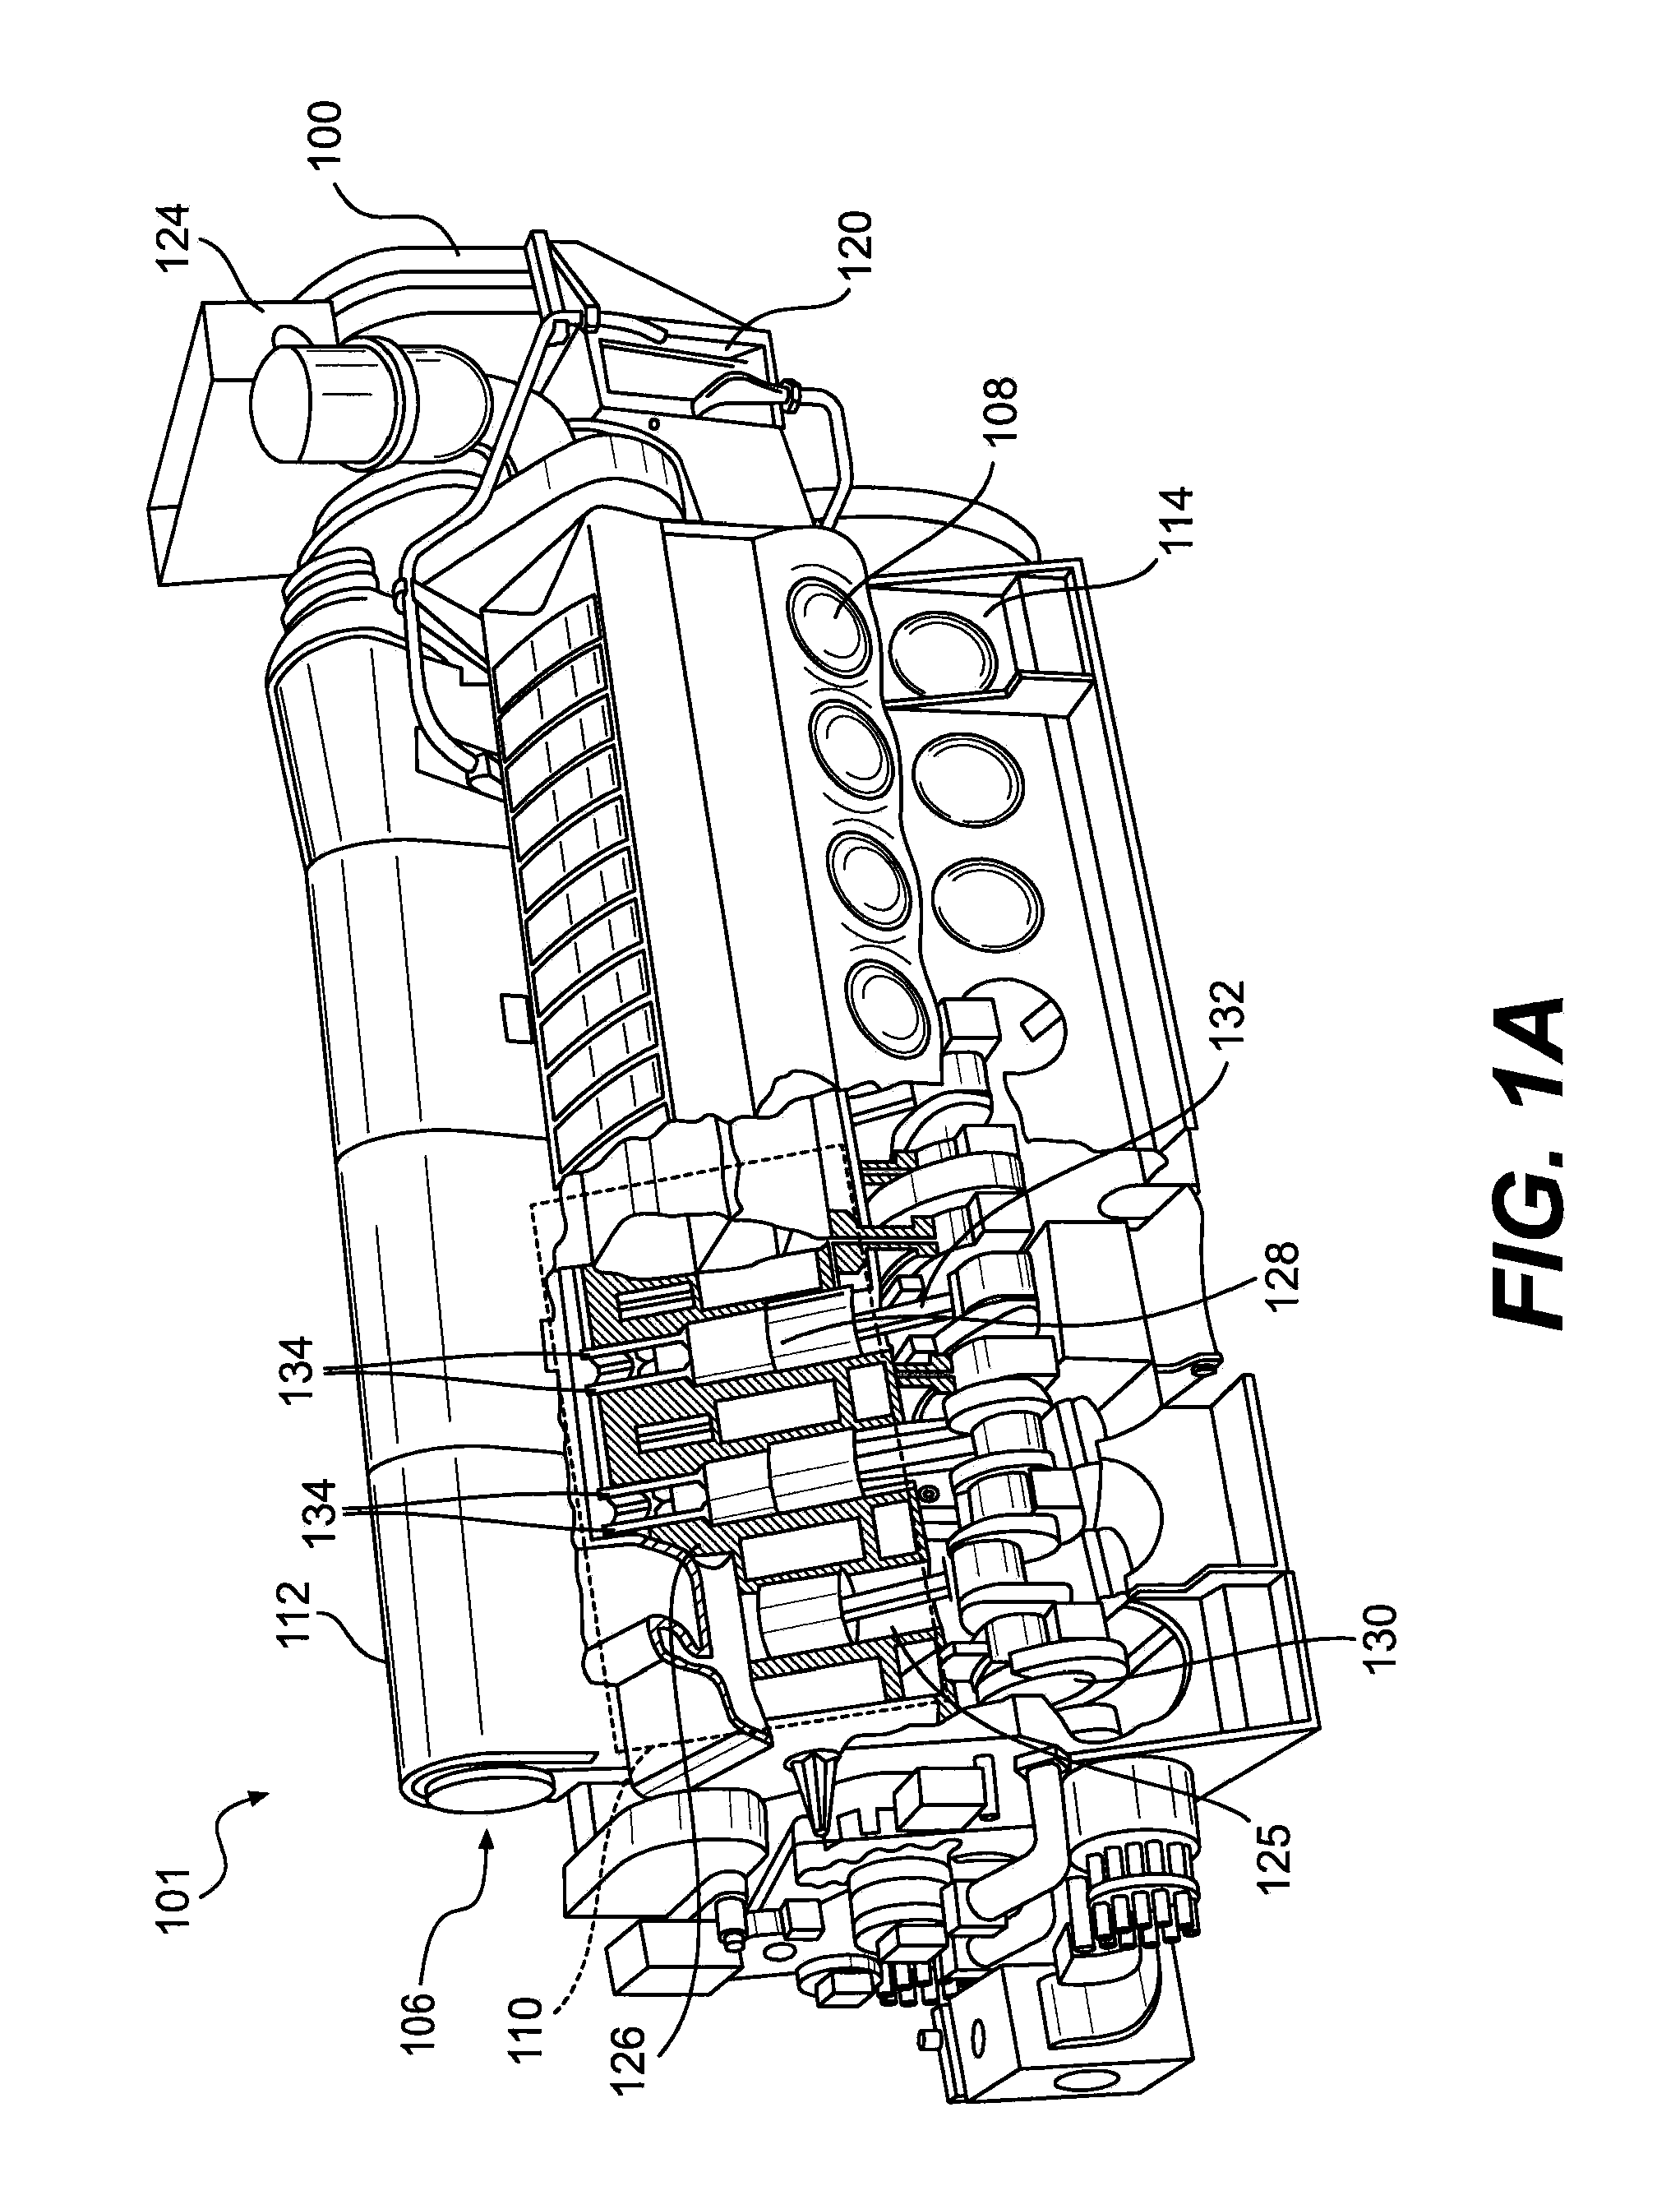 System for reducing engine emissions and backpressure using parallel emission reduction equipment